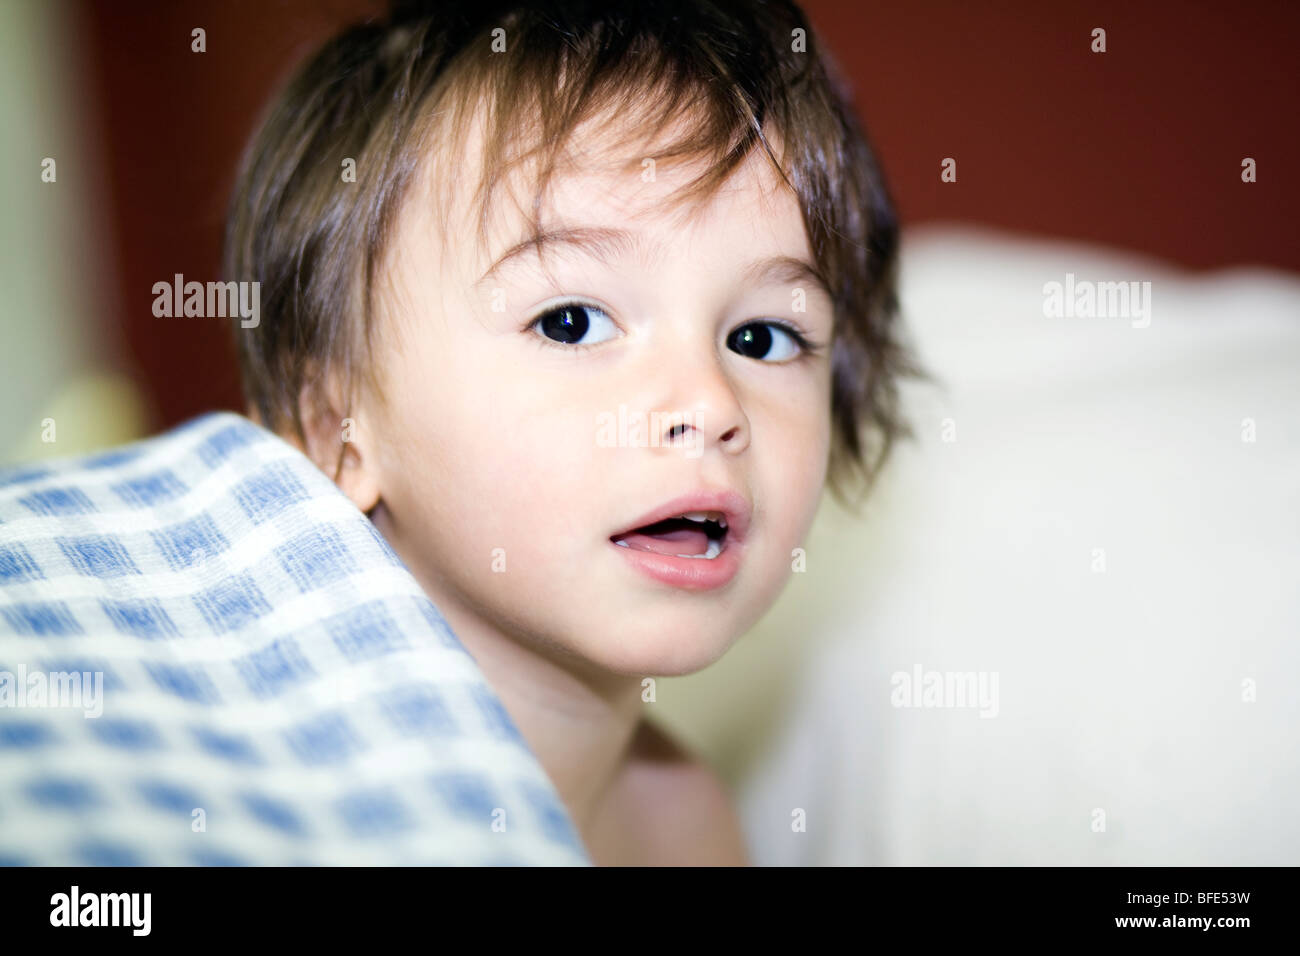 2 1/2 year old boy playing in bed sheets, Montreal, Quebec, Canada Stock Photo